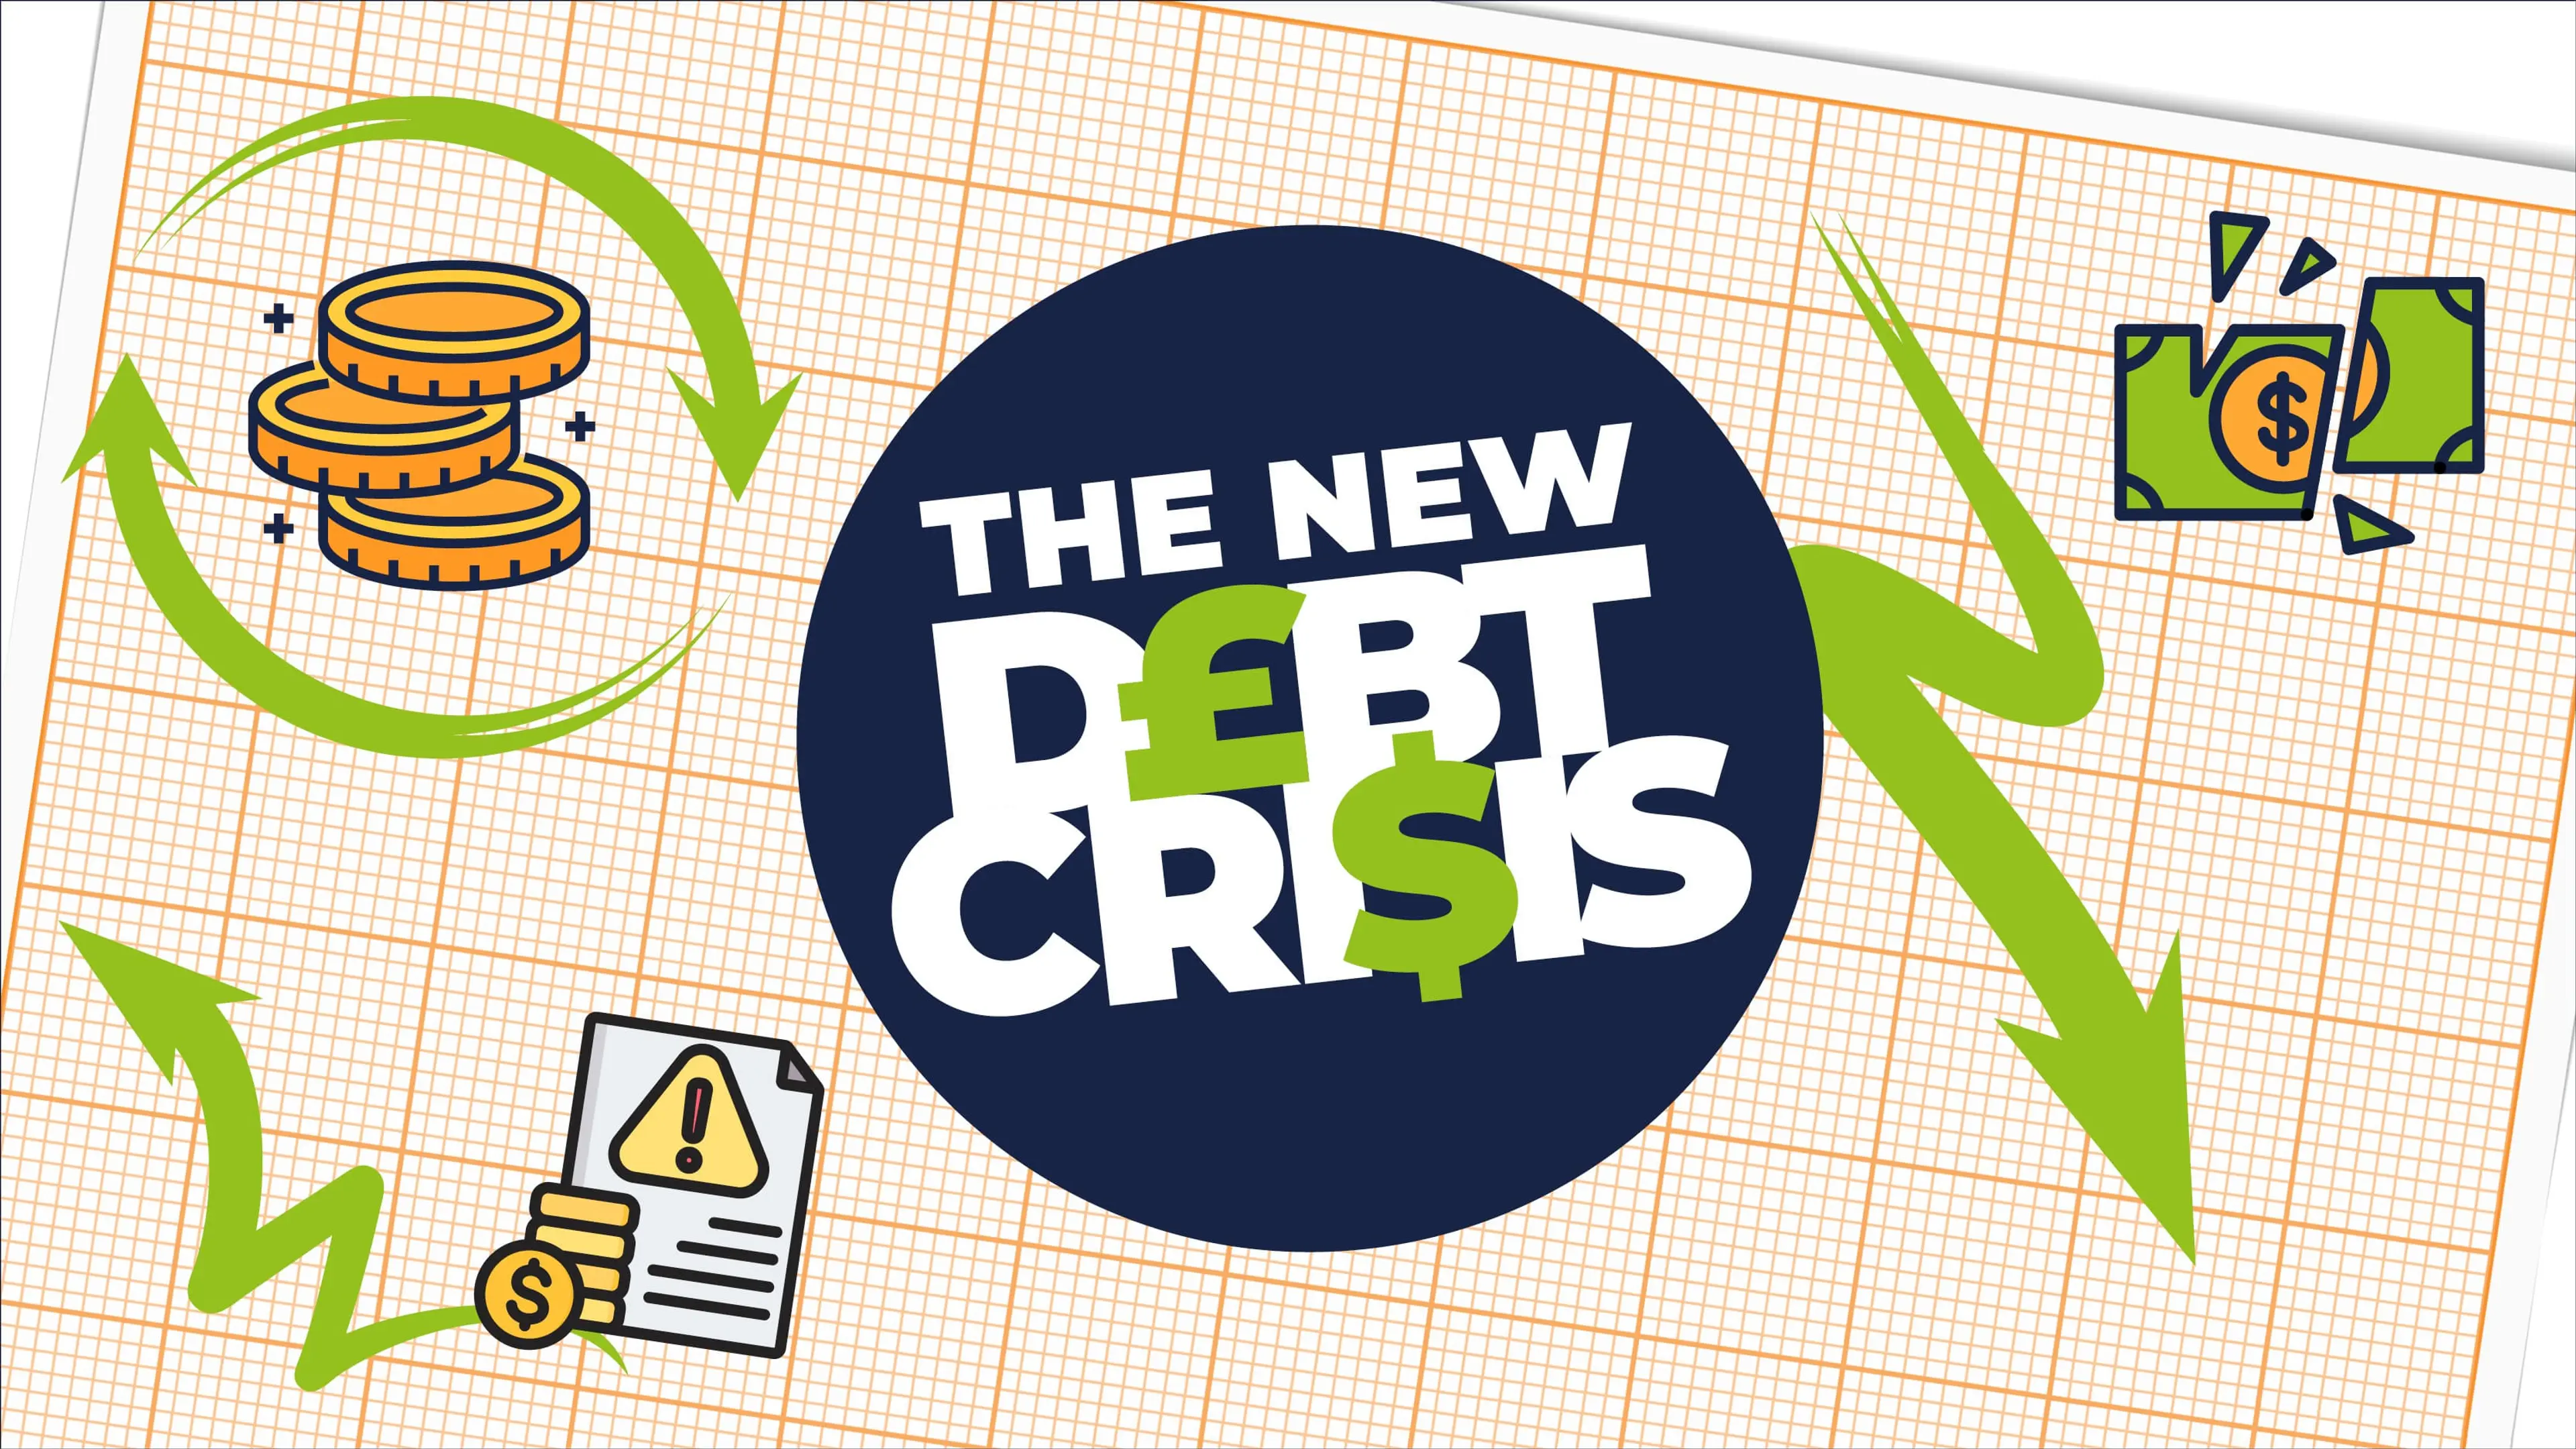 Help solve the new global debt crisis